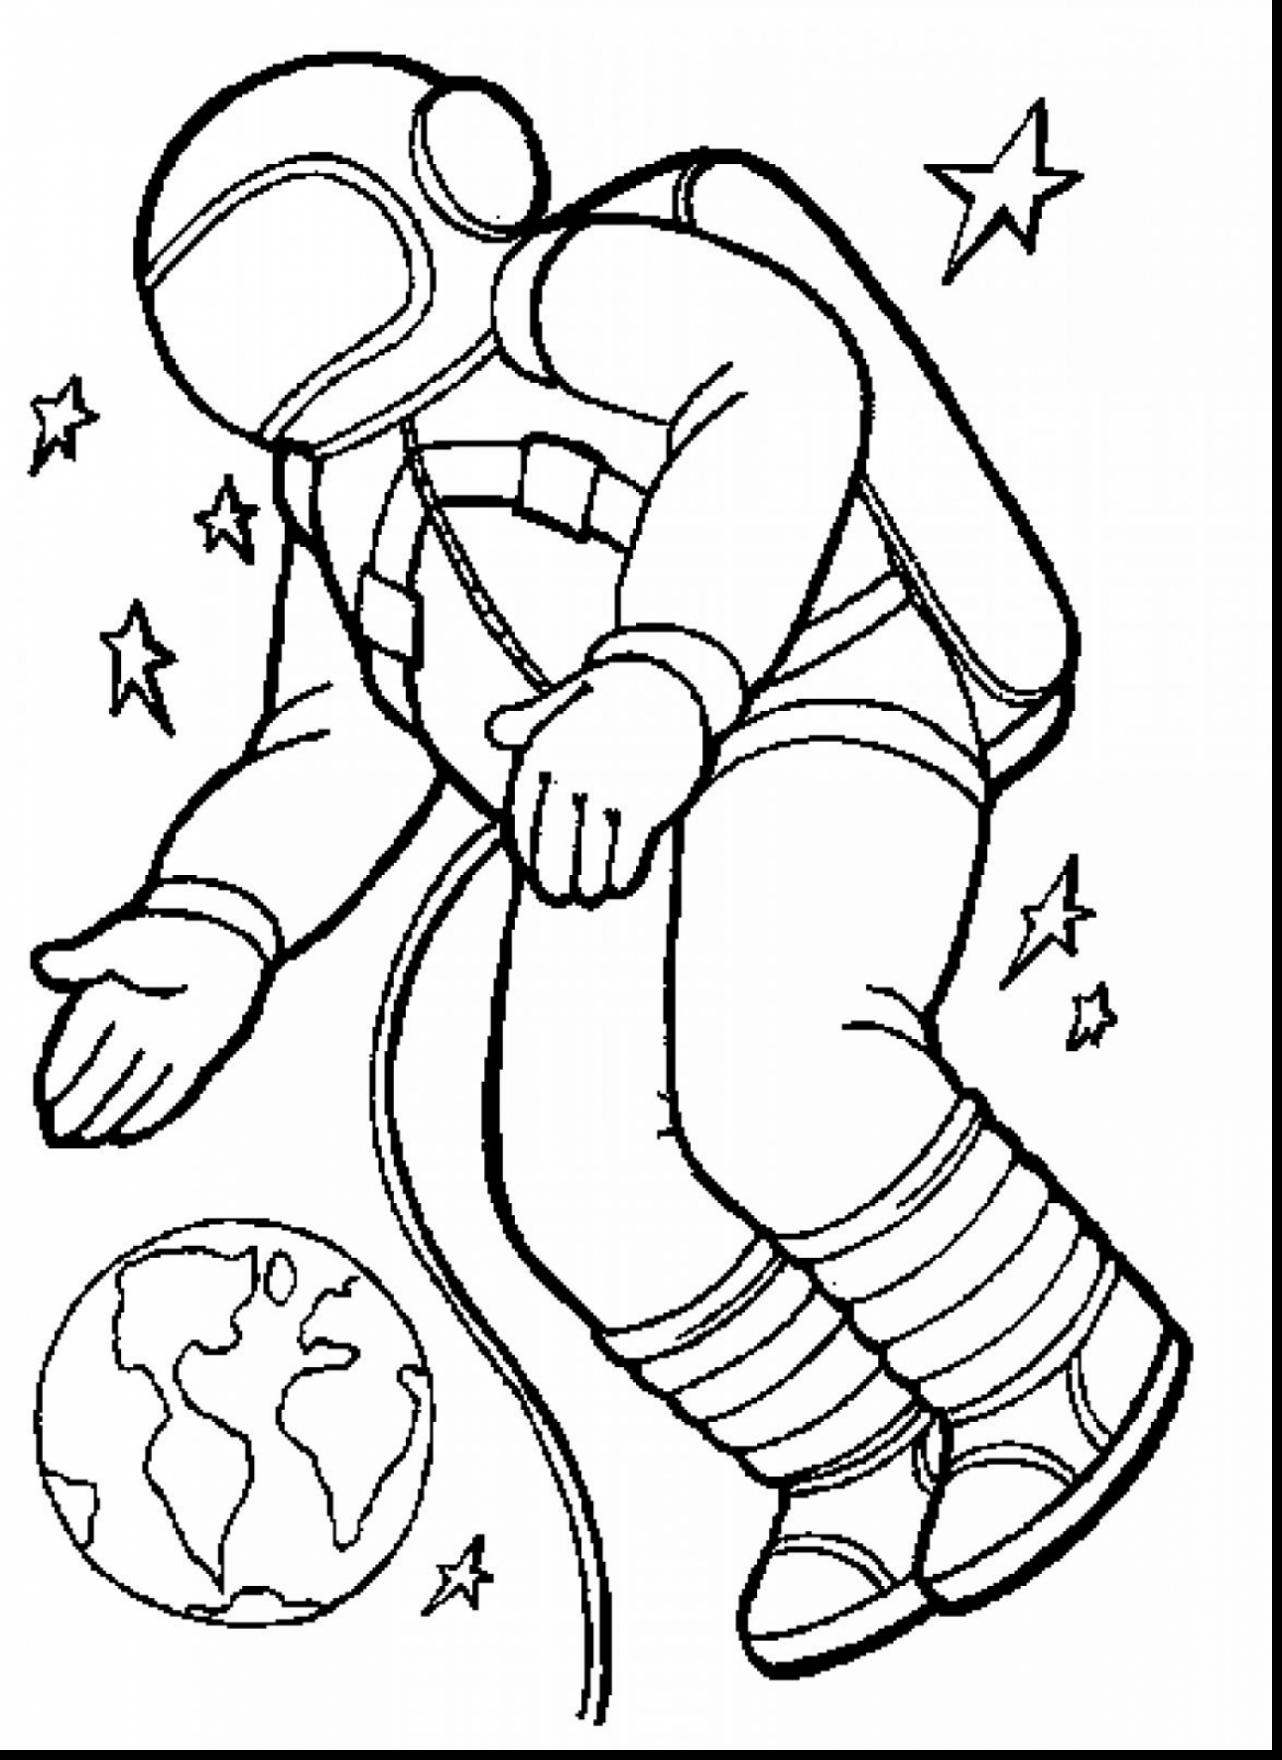 space-rocket-coloring-page-at-getdrawings-free-download